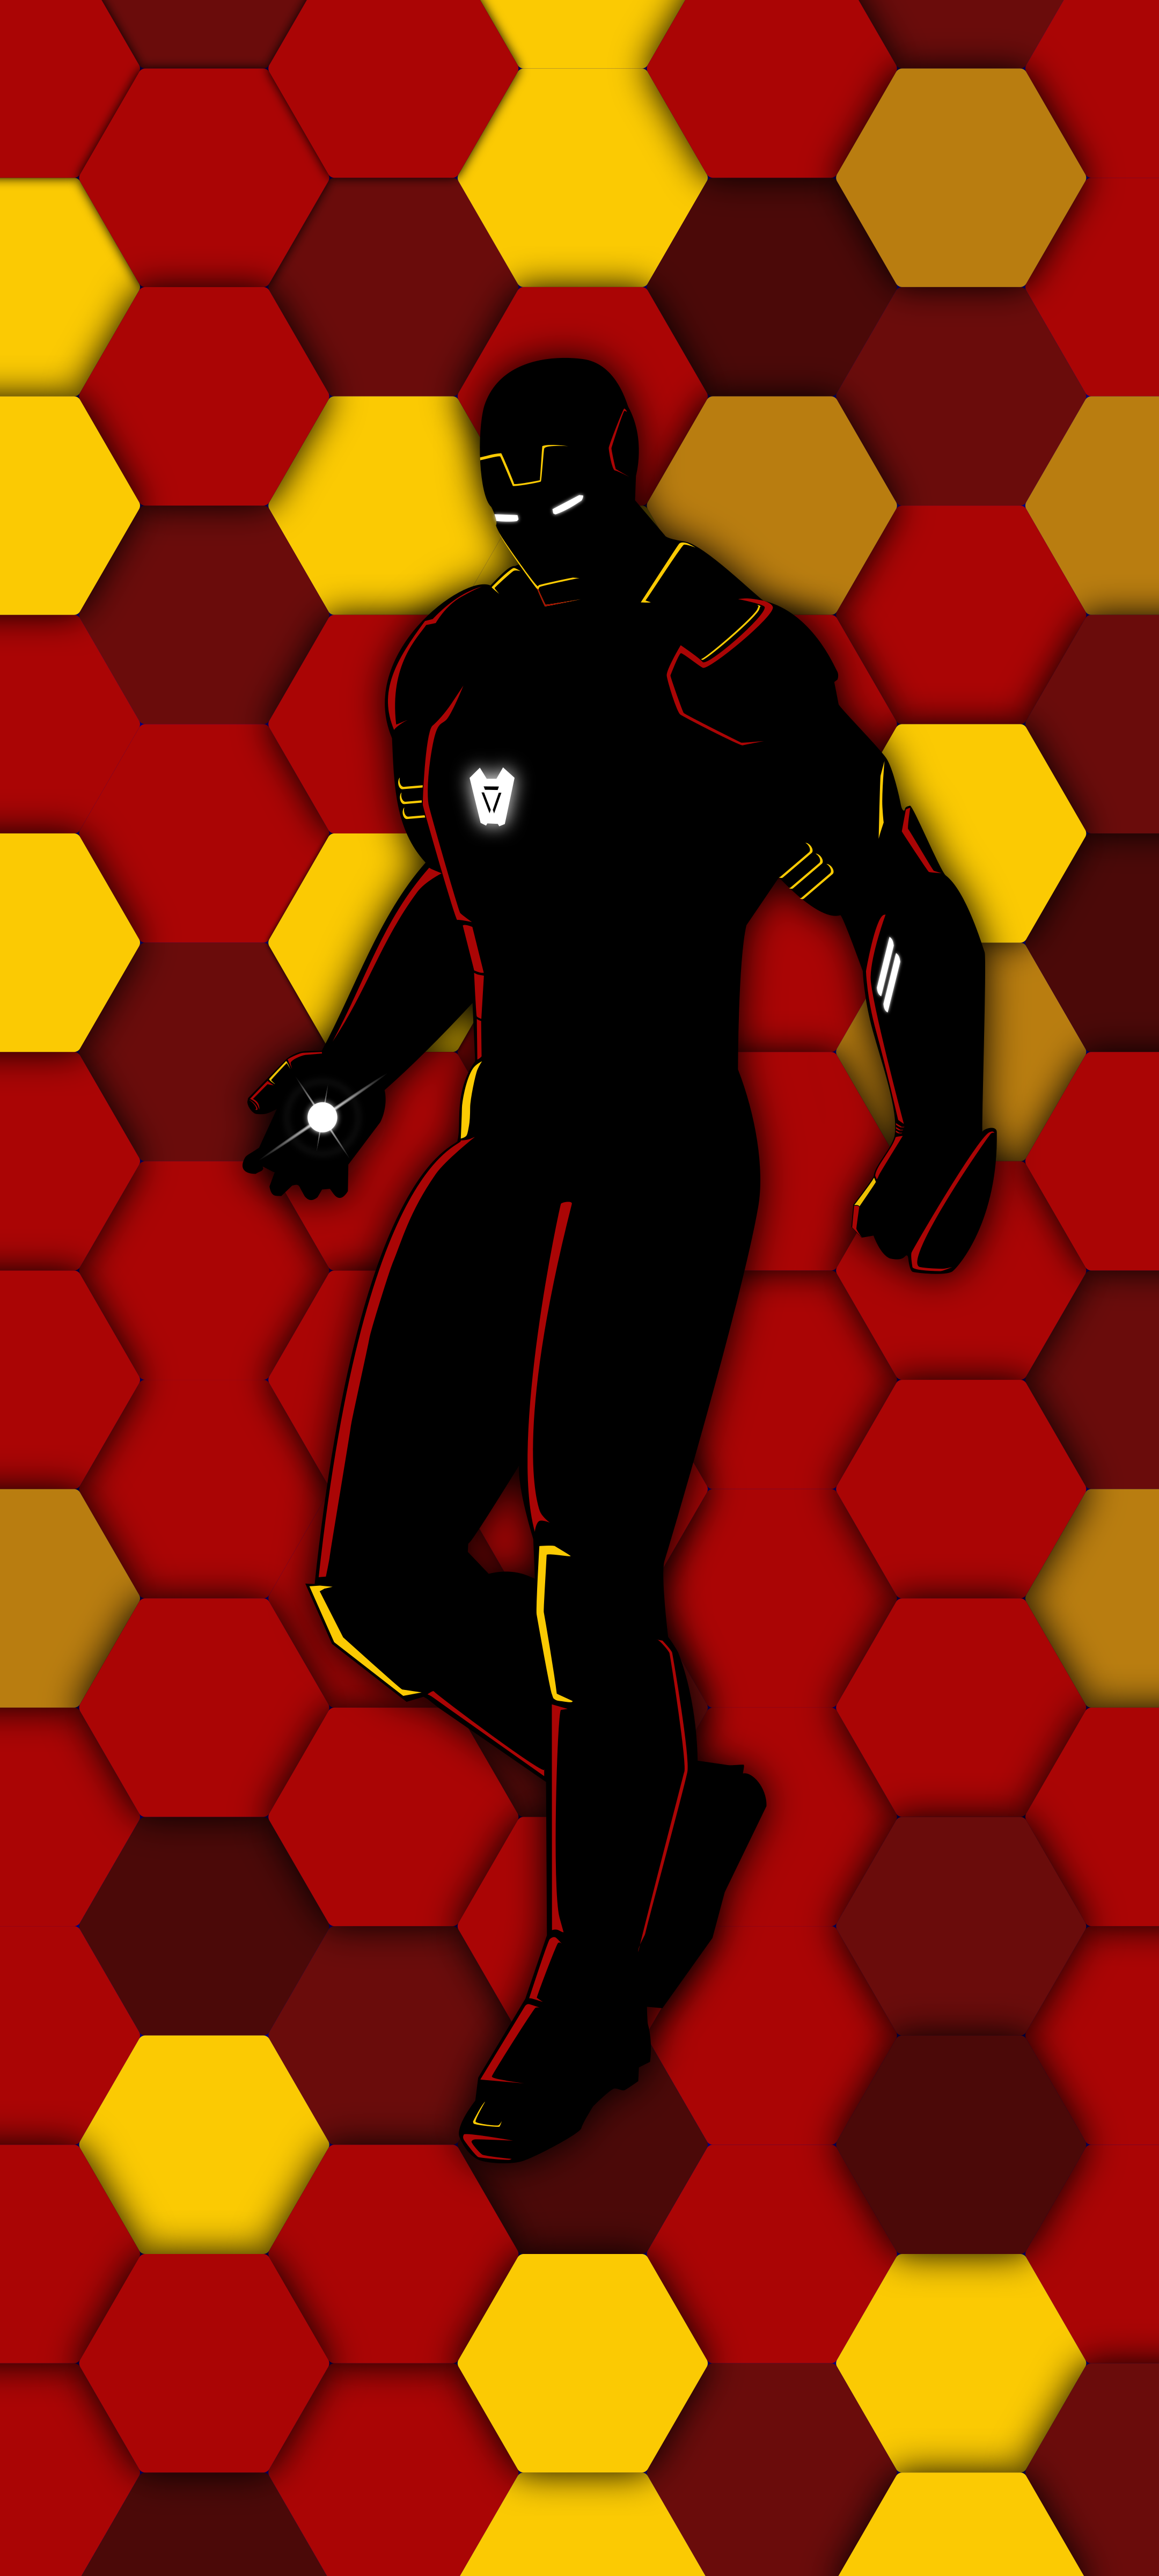 Iron Man Silhouette with hexagonal background by theKnight_2048